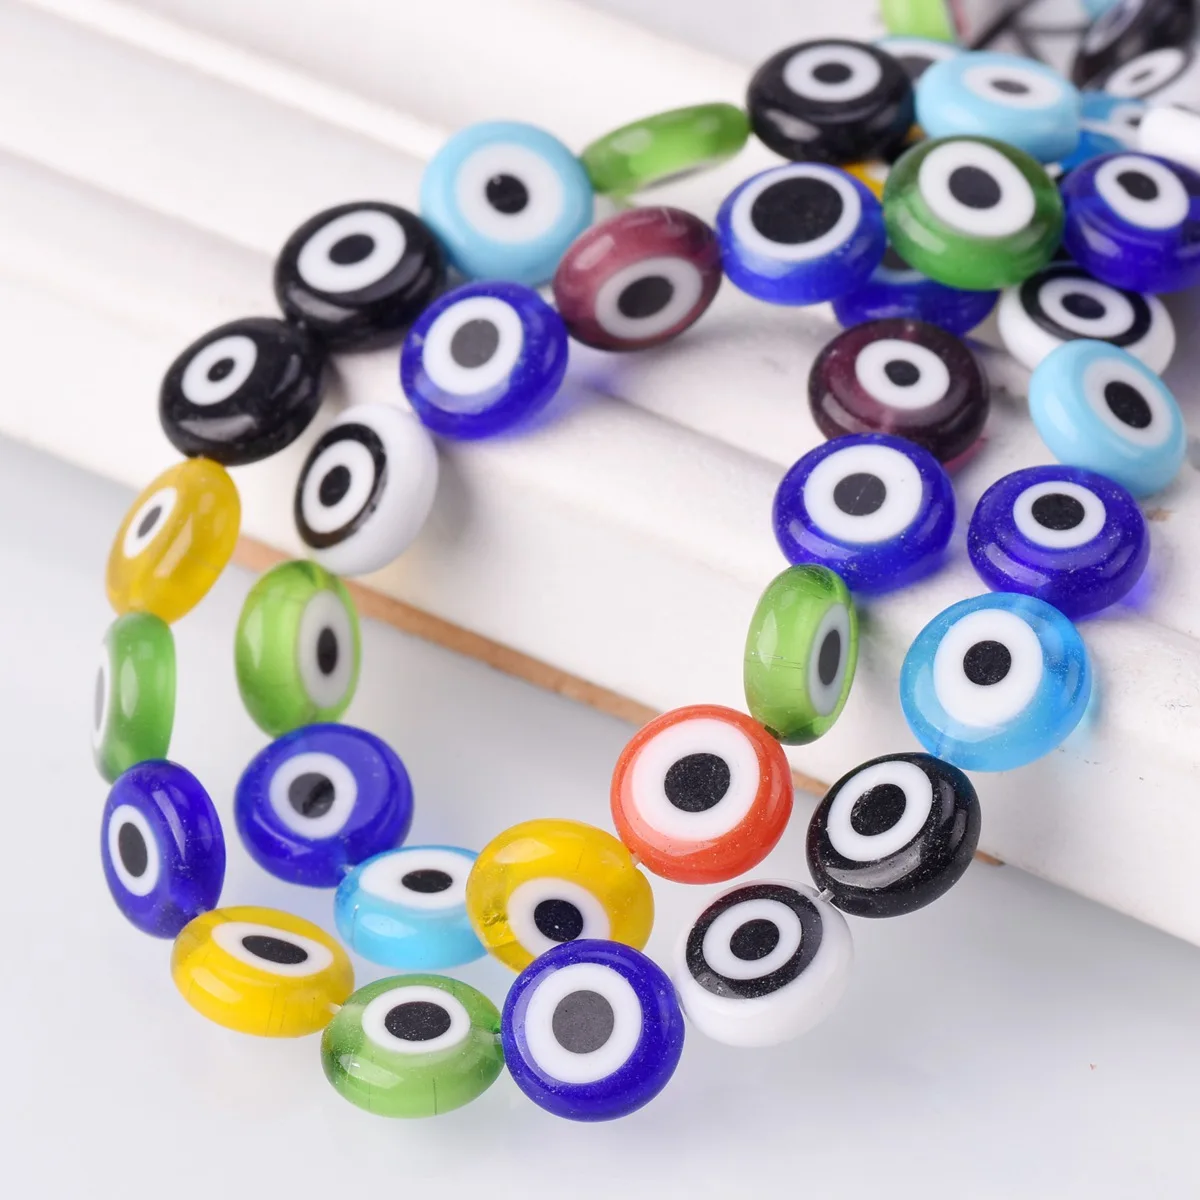 6mm 8mm 10mm 12mm Mixed Flat Round Evil Eye Millefiori Lampwork Glass Beads For Jewelry Making DIY Crafts Findings evil eye beads 7cm glass concept accessory jewelry materials believed to protect from ornament attractive men women room car body protector talisman mysterious spell summer winter outfit